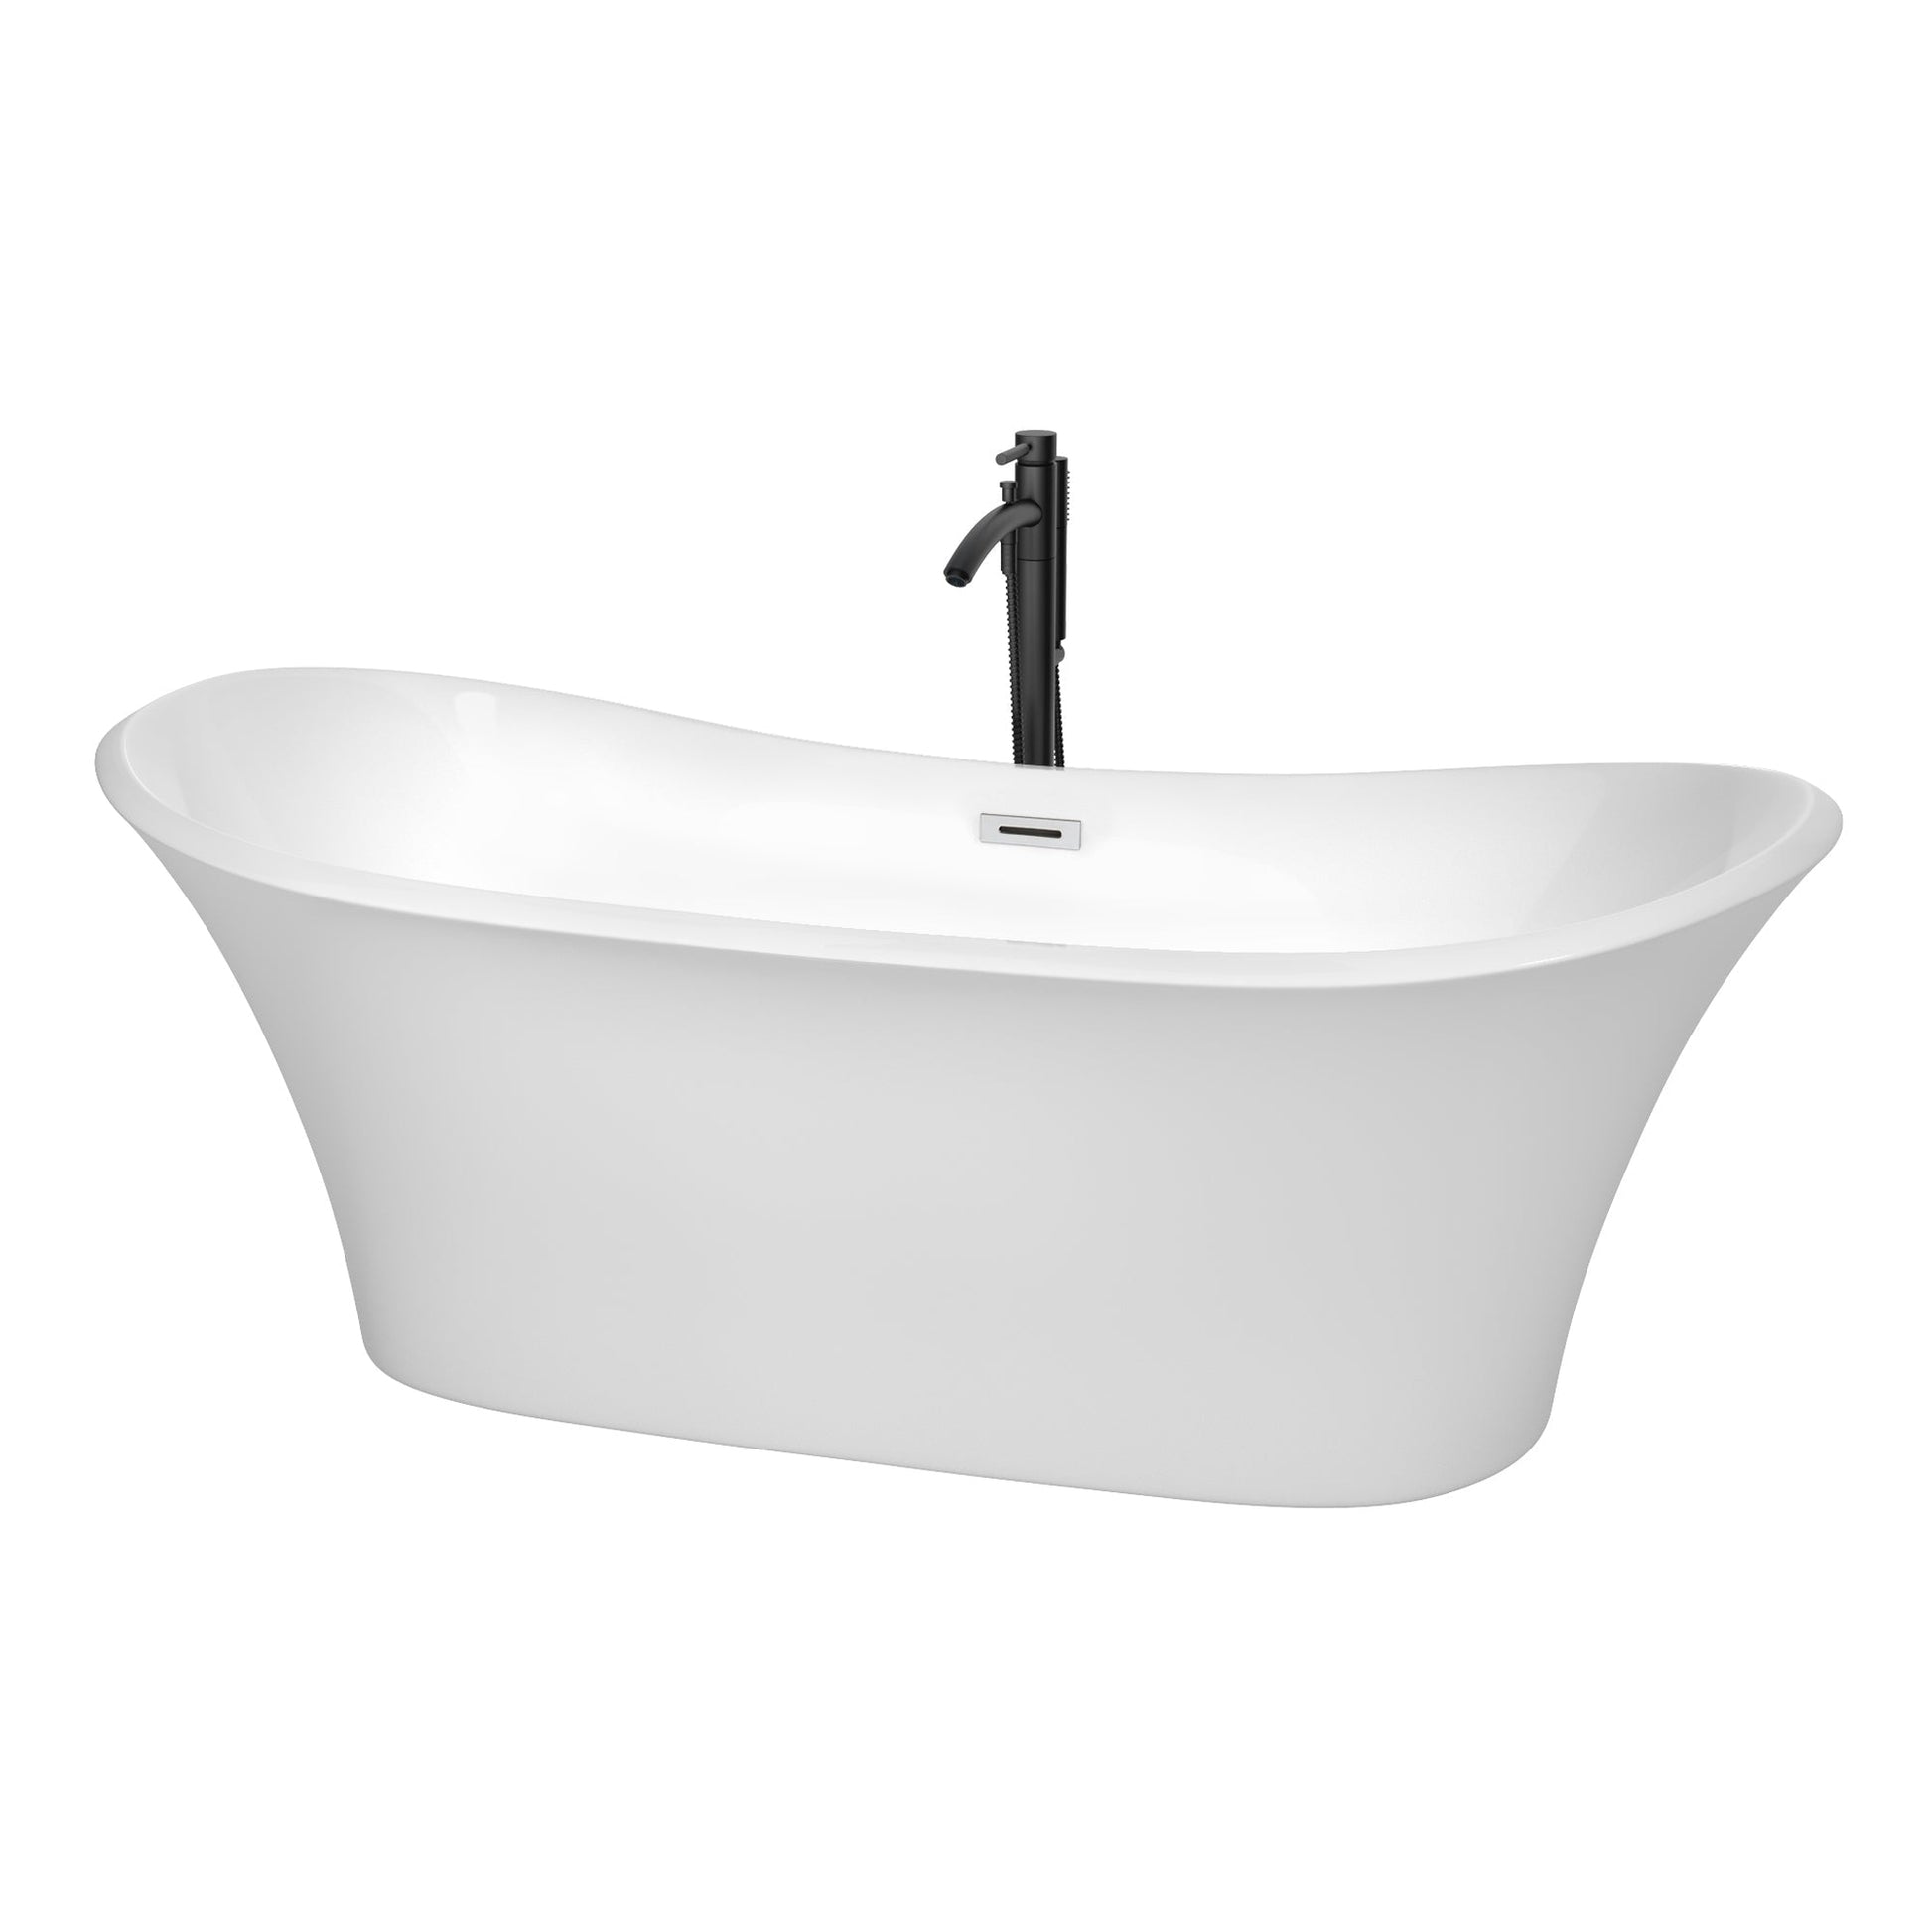 Wyndham Collection Bolera 71" Freestanding Bathtub in White With Polished Chrome Trim and Floor Mounted Faucet in Matte Black